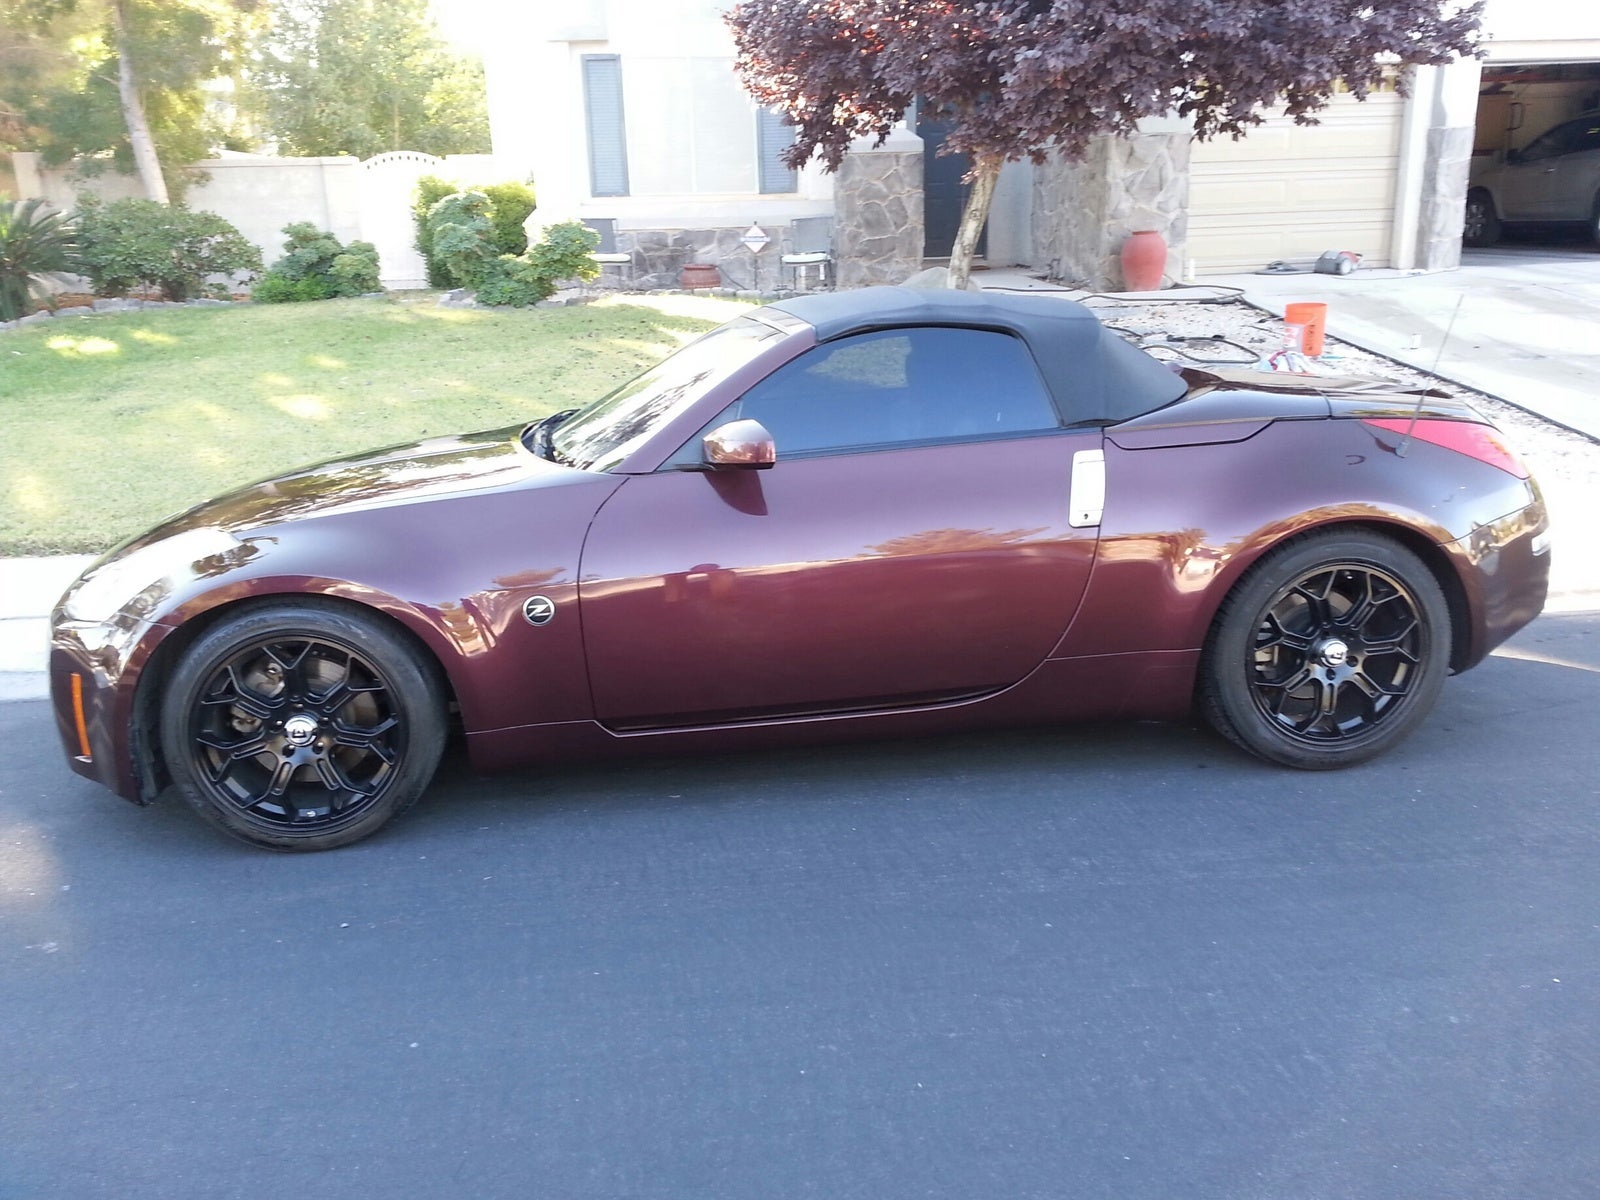 2006 Nissan 350z touring roadster specs #1